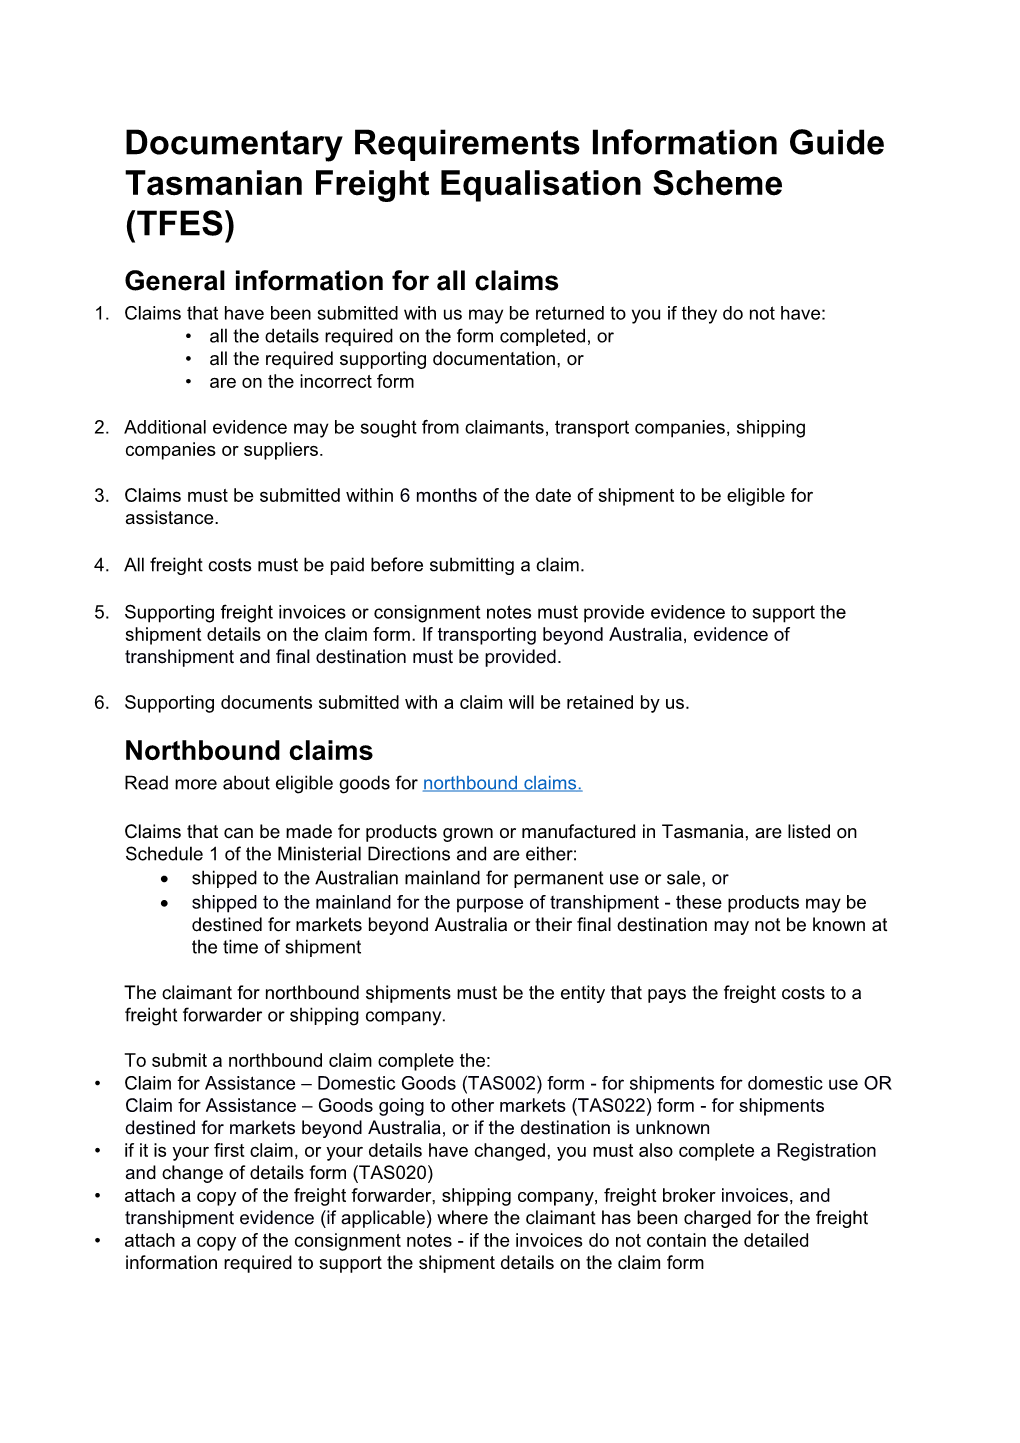 Documentary Requirements Information Guide Tasmanian Freight Equalisation Scheme (TFES)